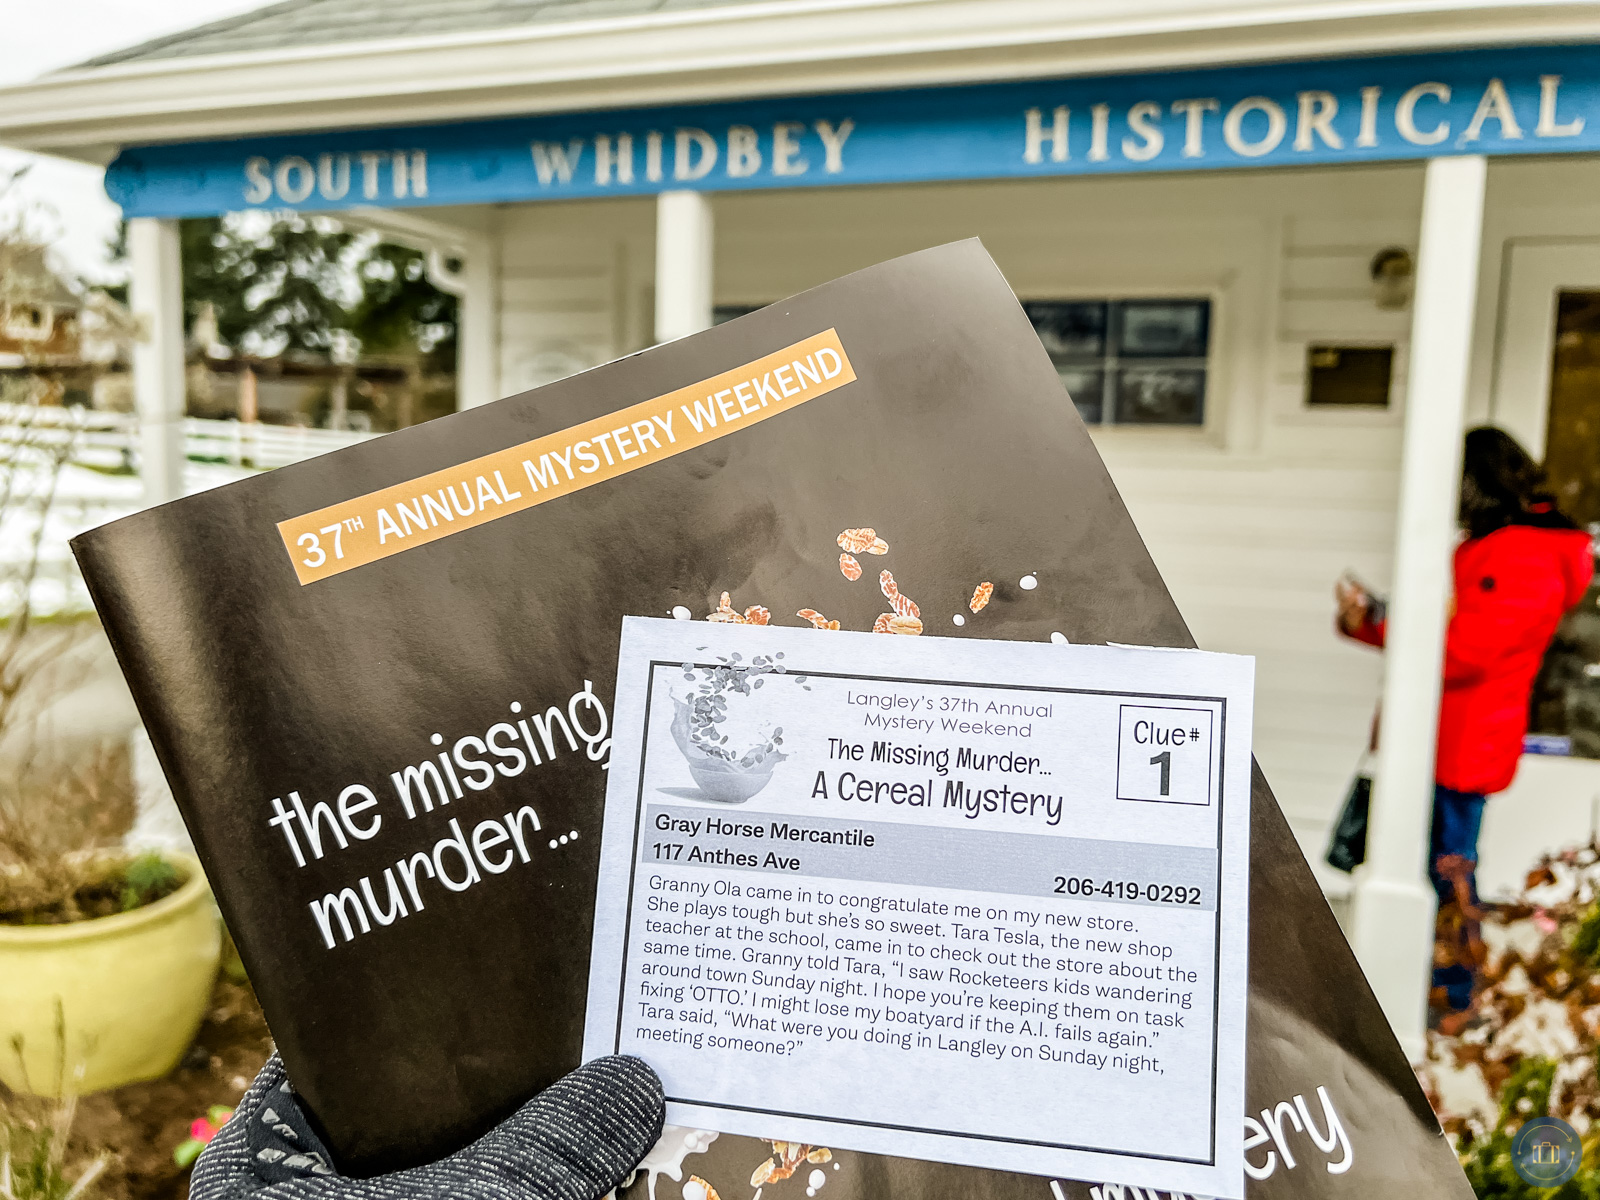 langley murder mystery weekend clue booklet and clue paper